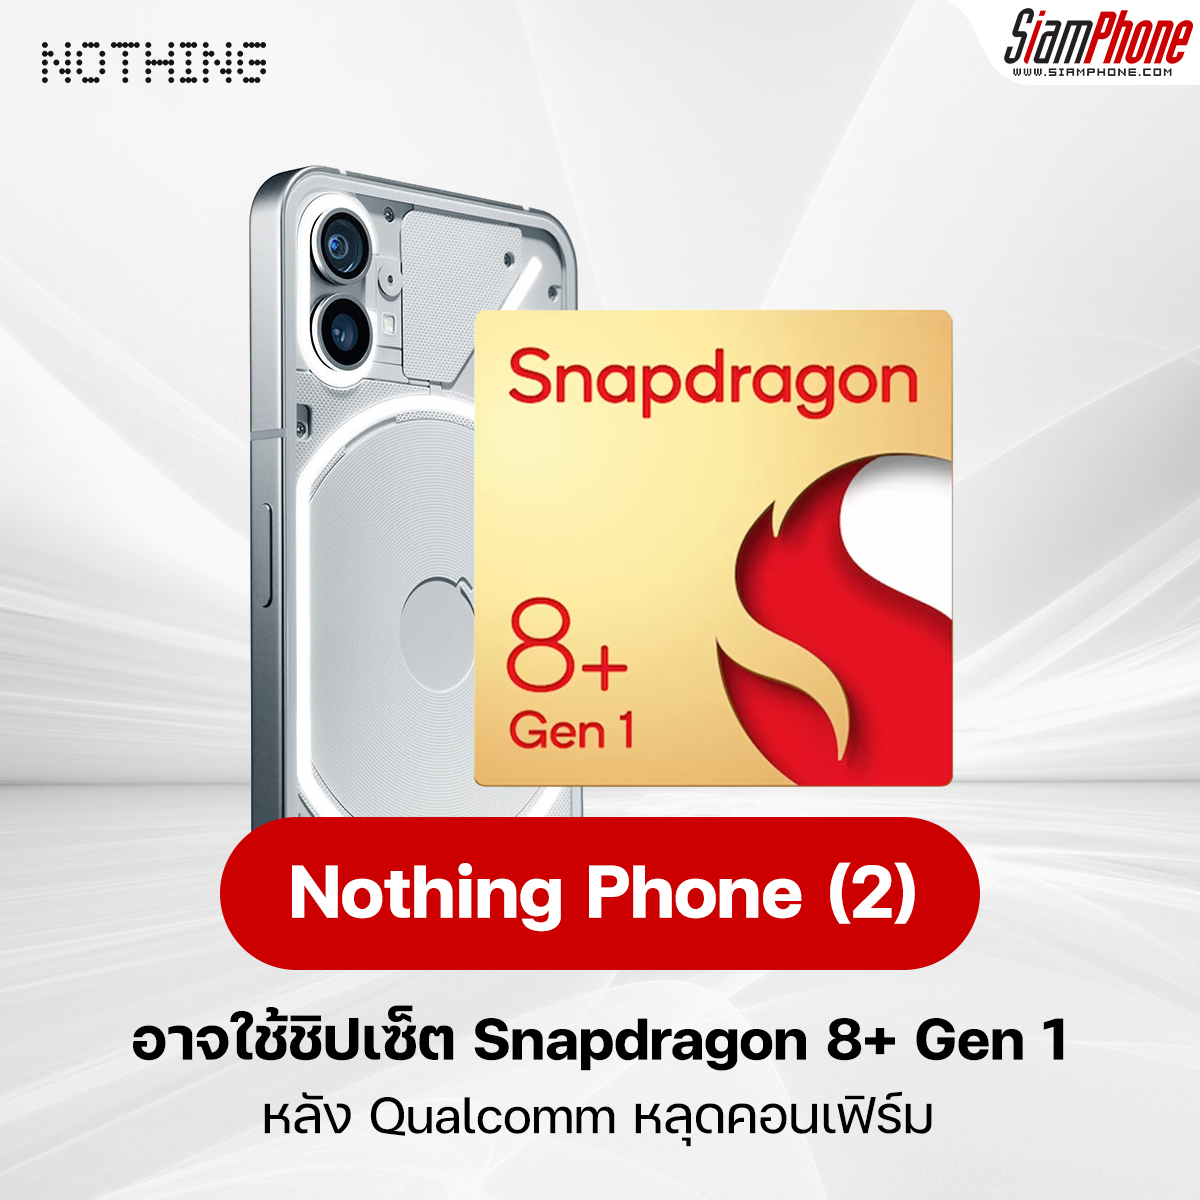 Nothing Phone (2) may use a Snapdragon 8+ Gen 1 chipset after Qualcomm has confirmed